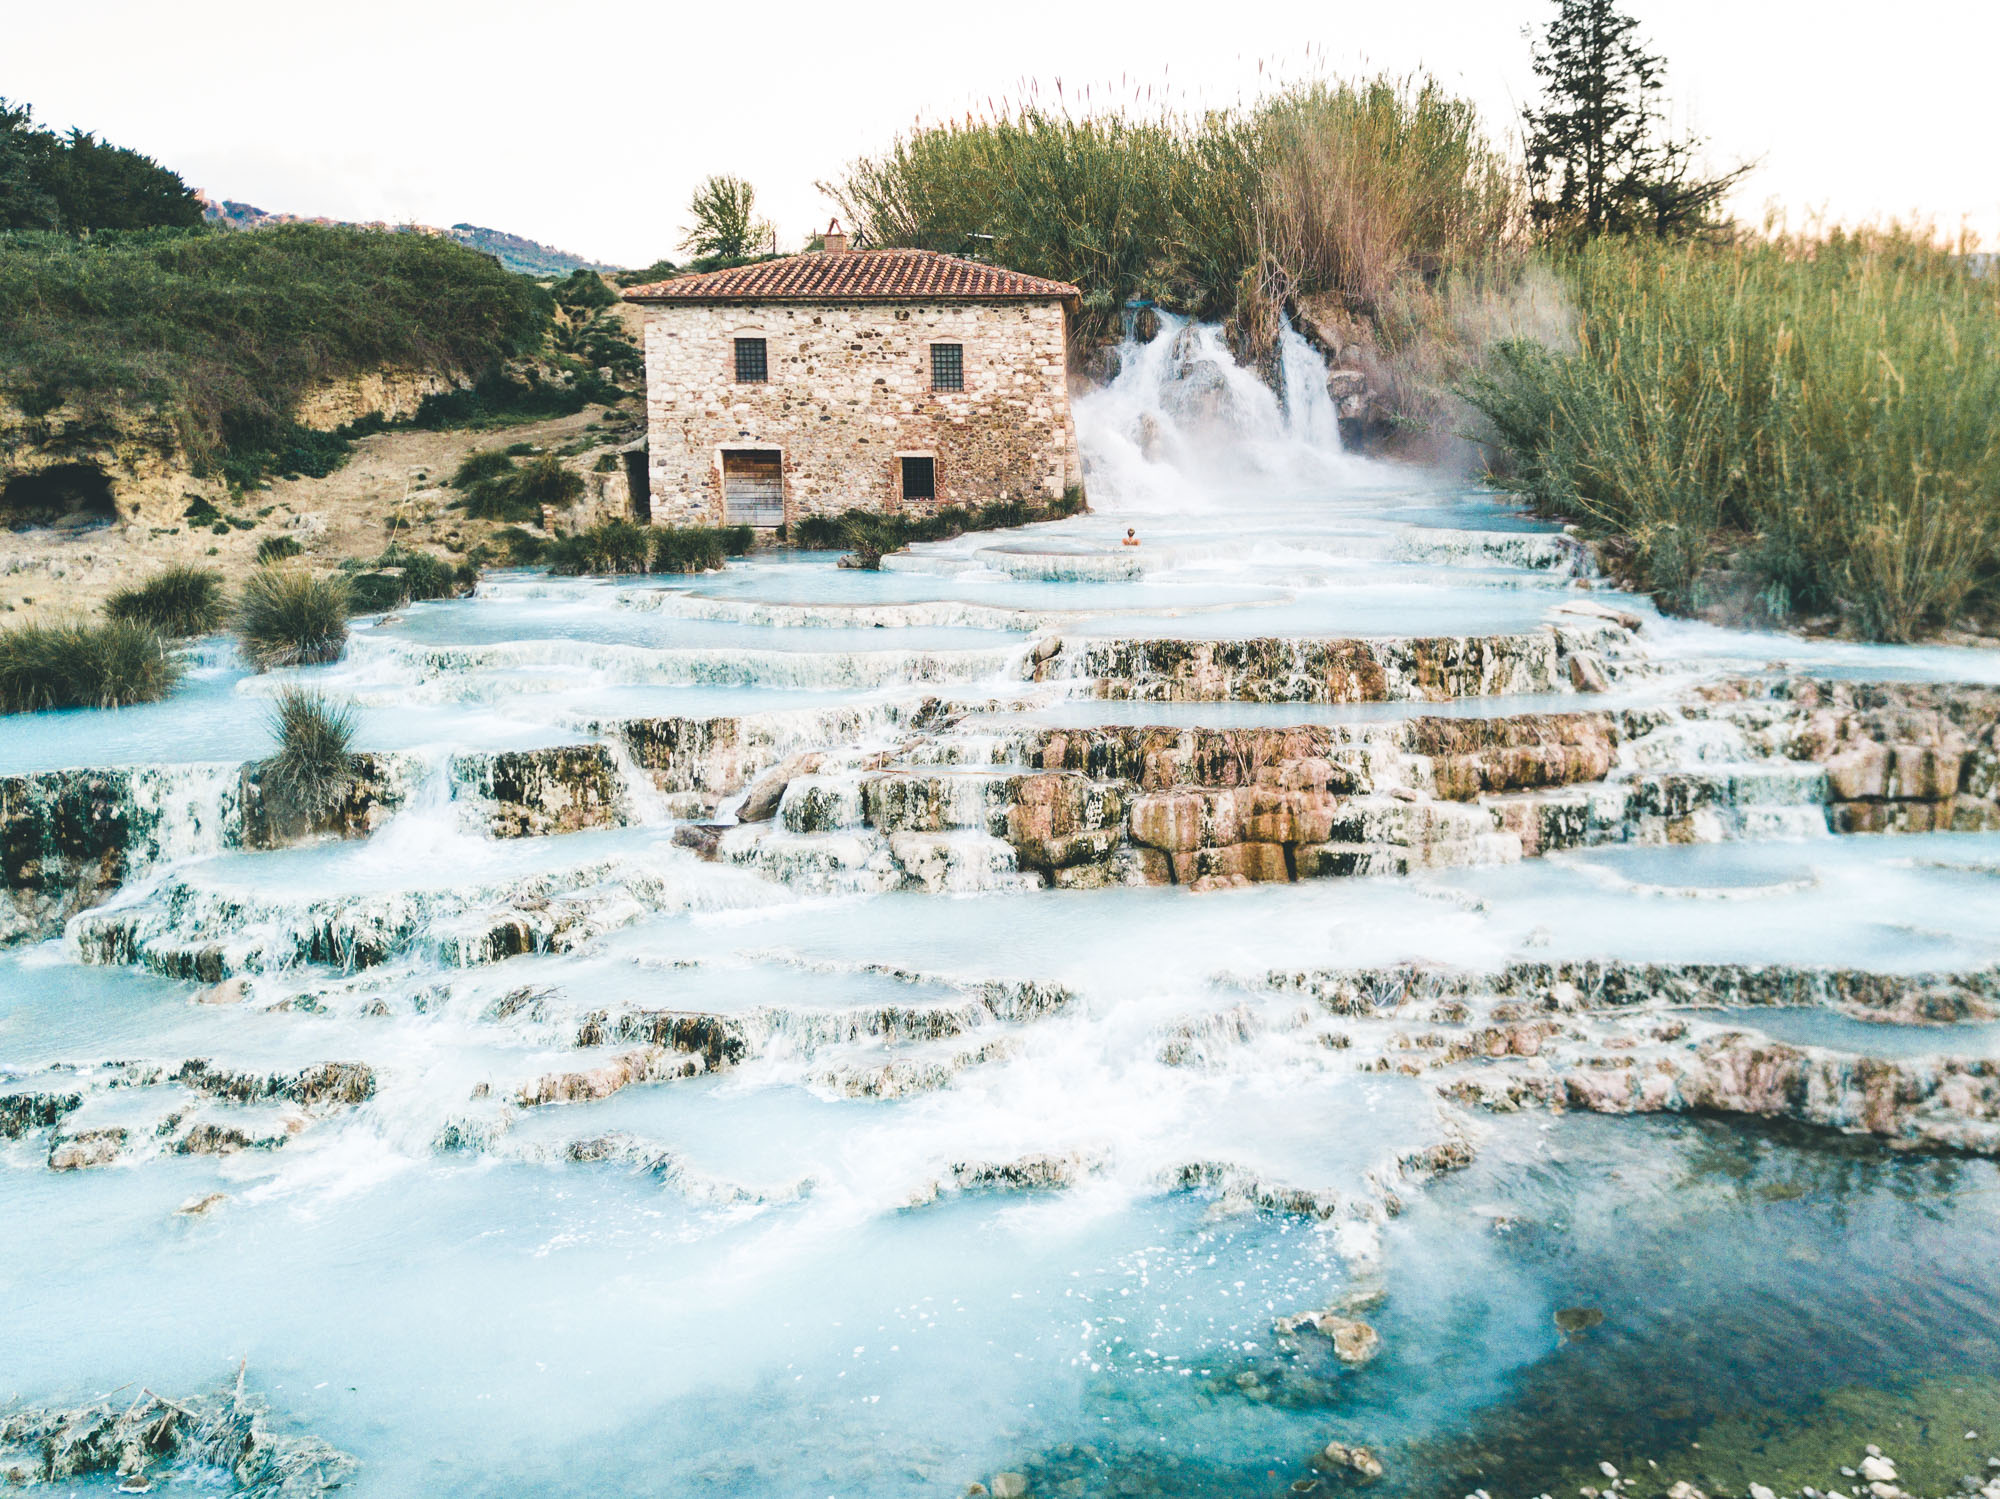 A natural thermal bath mineral hot springs in Tuscany, Italy